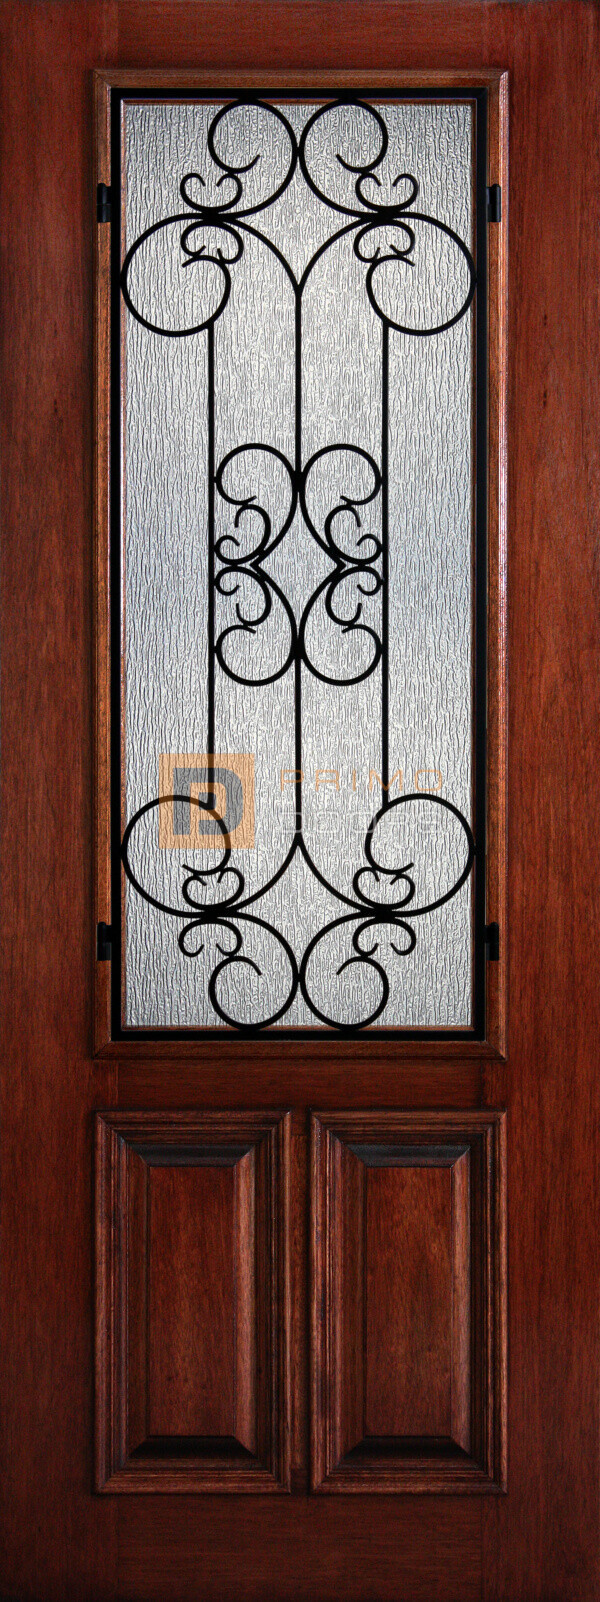 8′ 2/3 Lite Decorative Glass with Iron Grill - Mahogany Single Front Door – PD 3080-23 SIEN